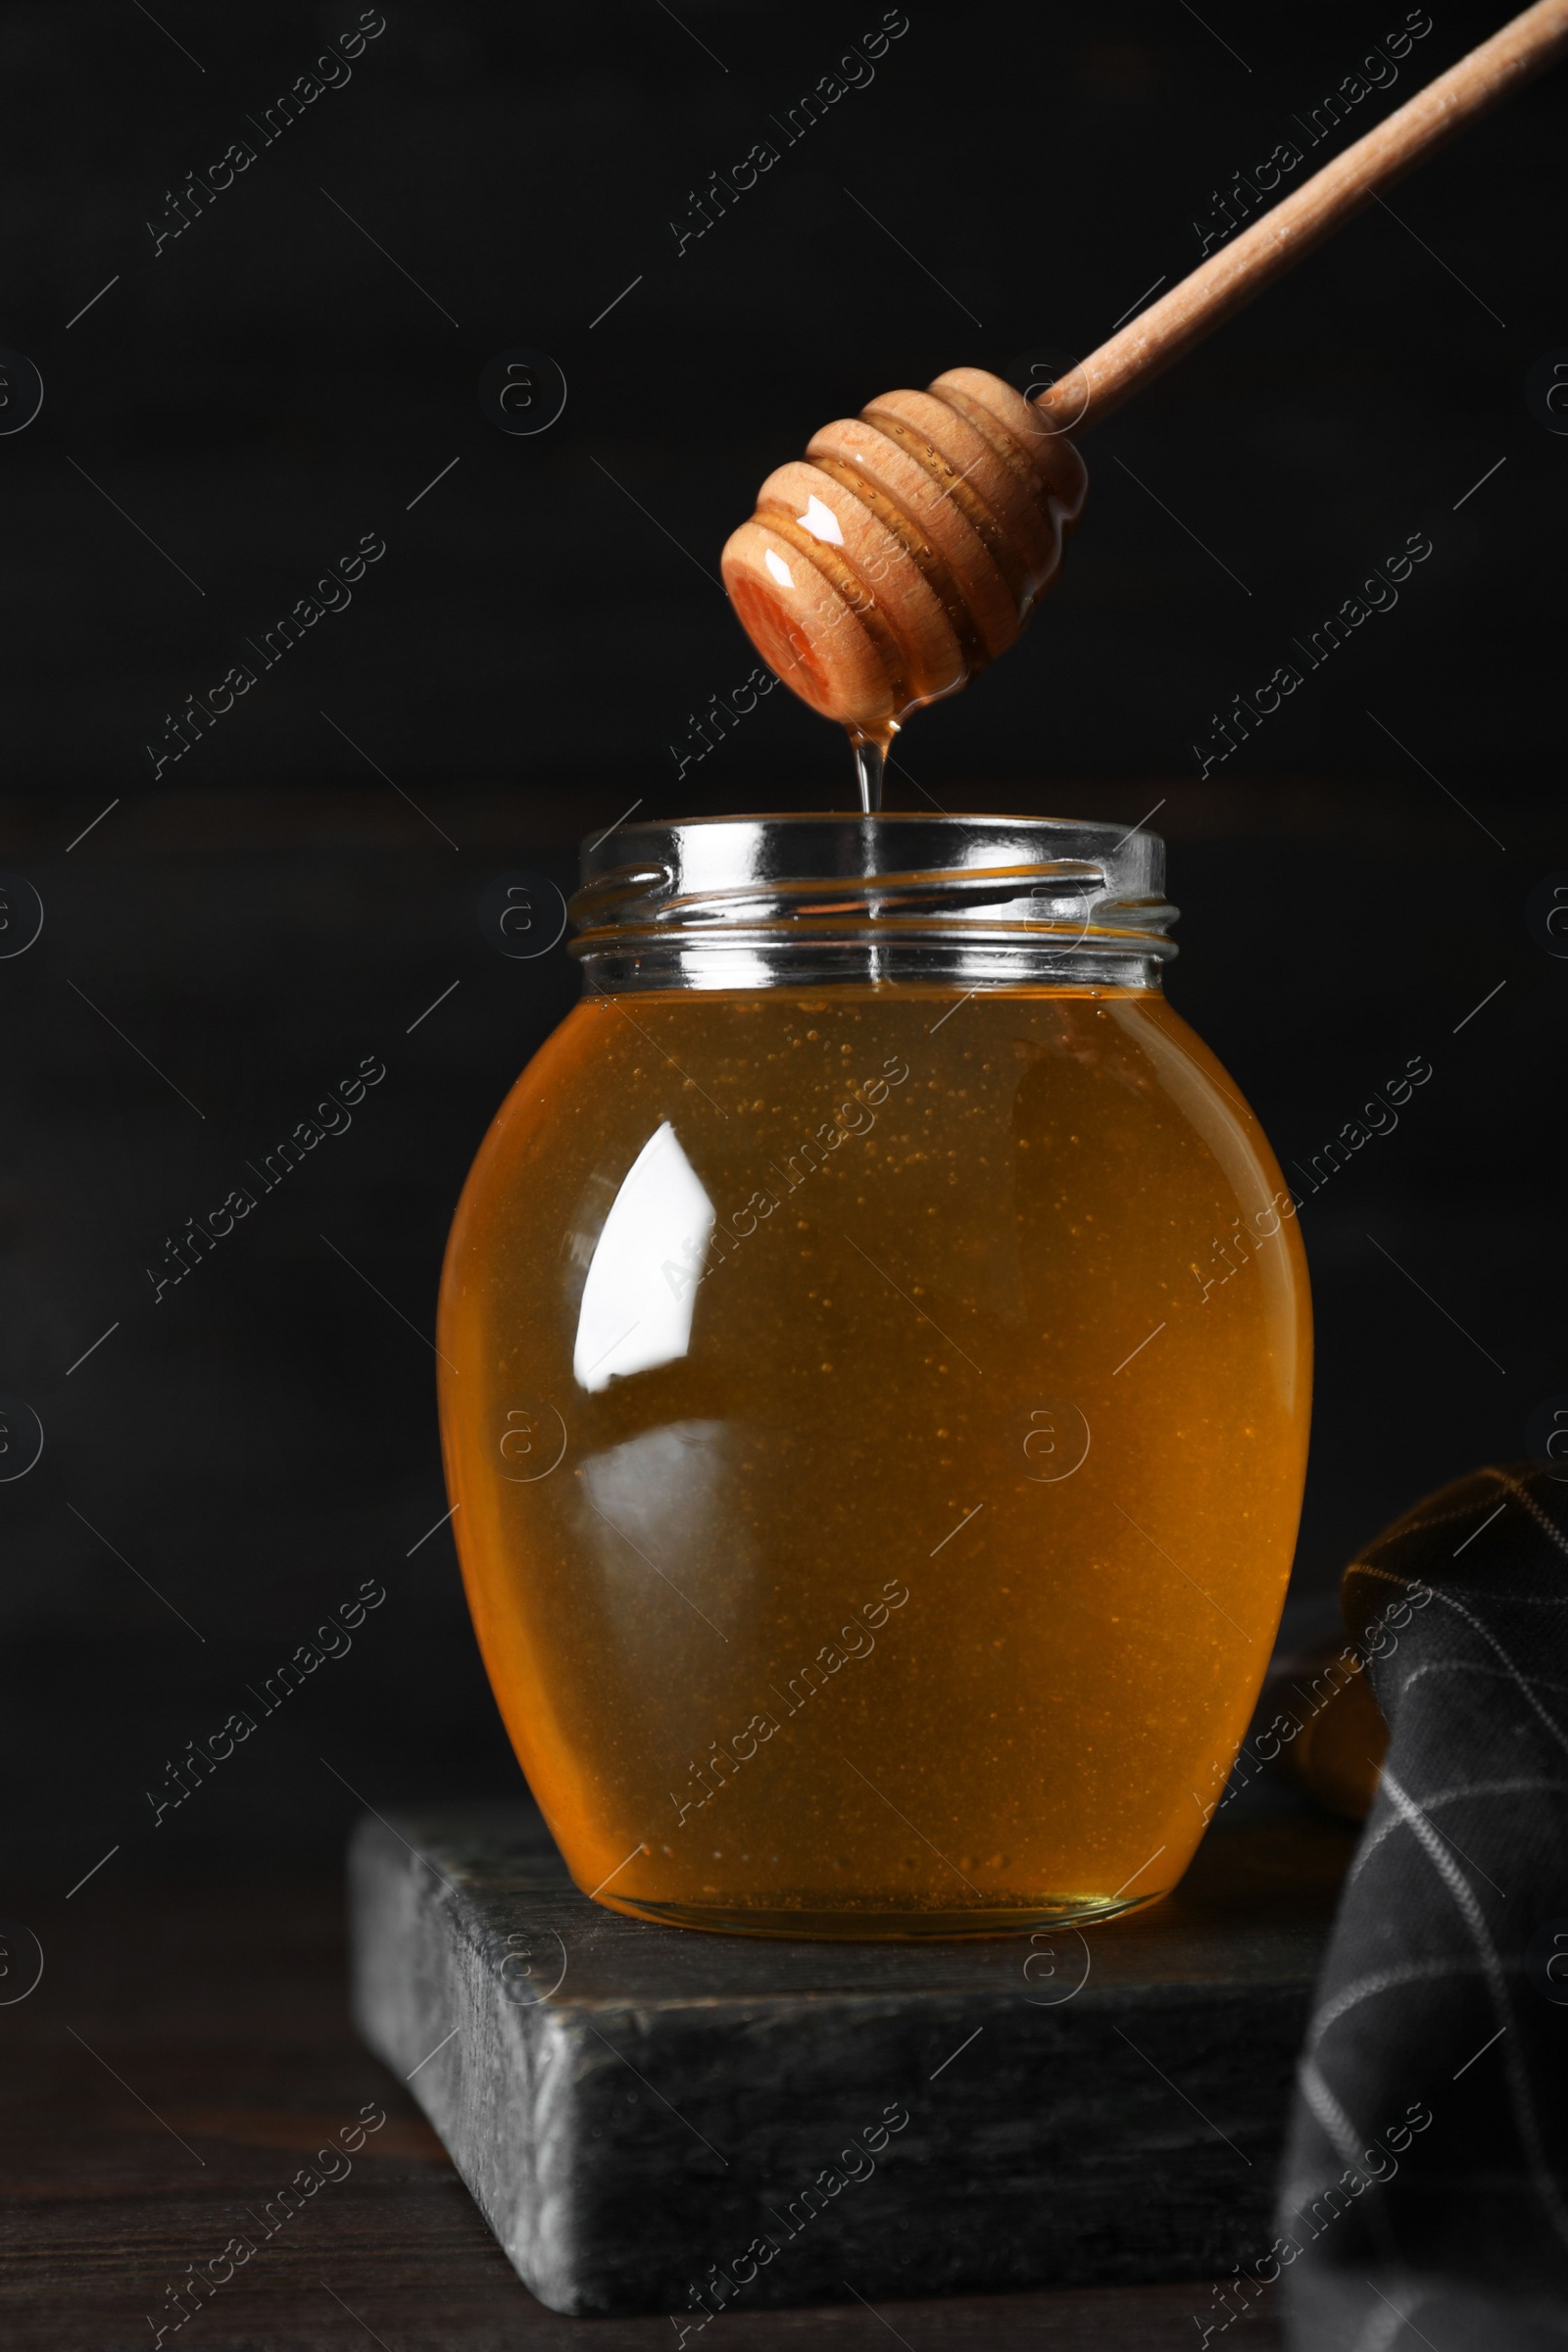 Photo of Jar of organic honey and dipper on wooden table against dark background